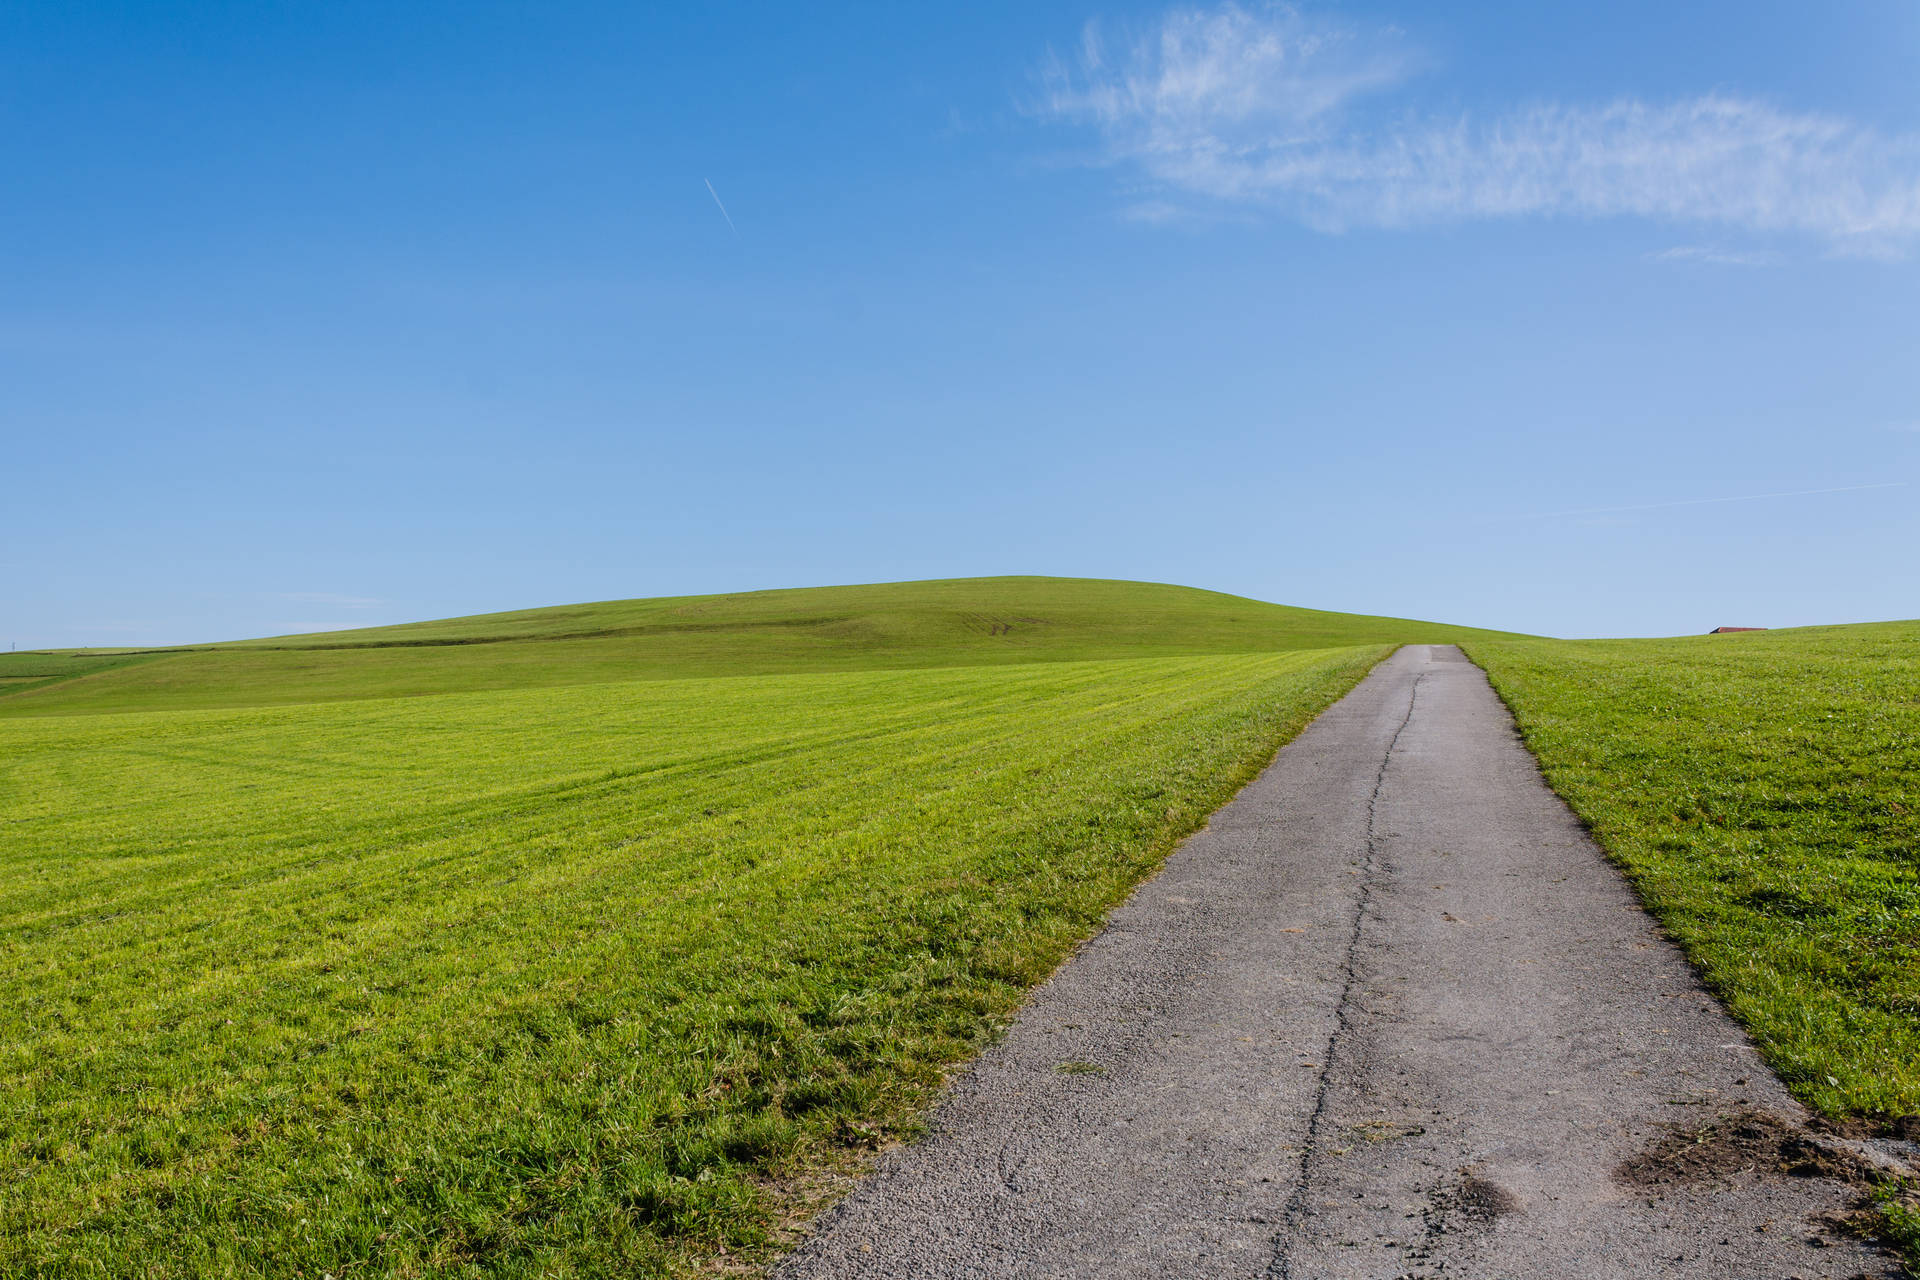 Windows Xp 5595X3730 Wallpaper and Background Image